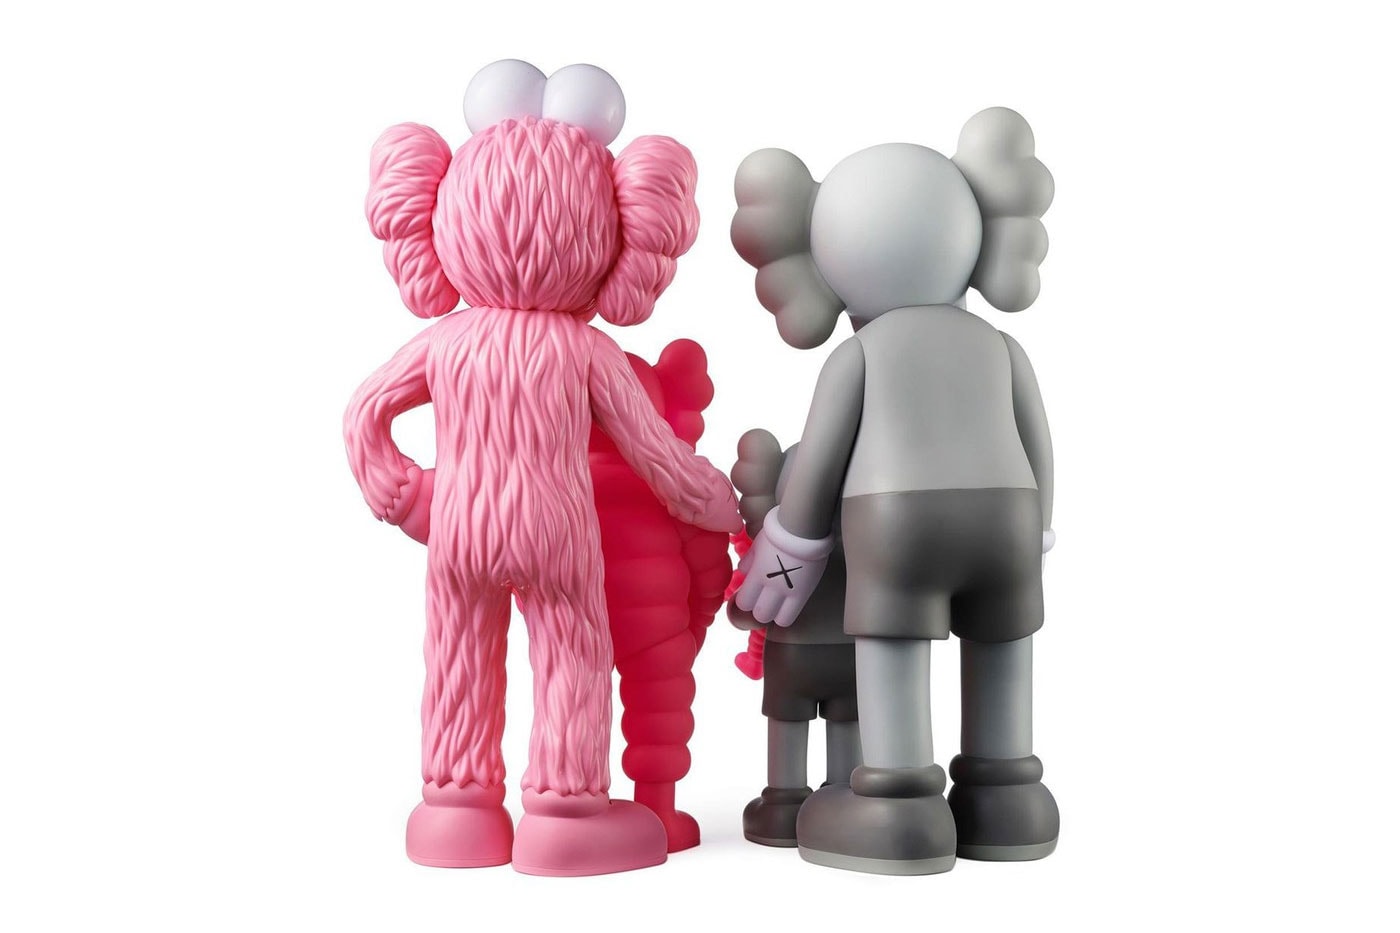 https://image-cdn.hypb.st/https%3A%2F%2Fhypebeast.com%2Fimage%2F2022%2F02%2Fkaws-family-companion-collection-release-info-002.jpg?cbr=1&q=90